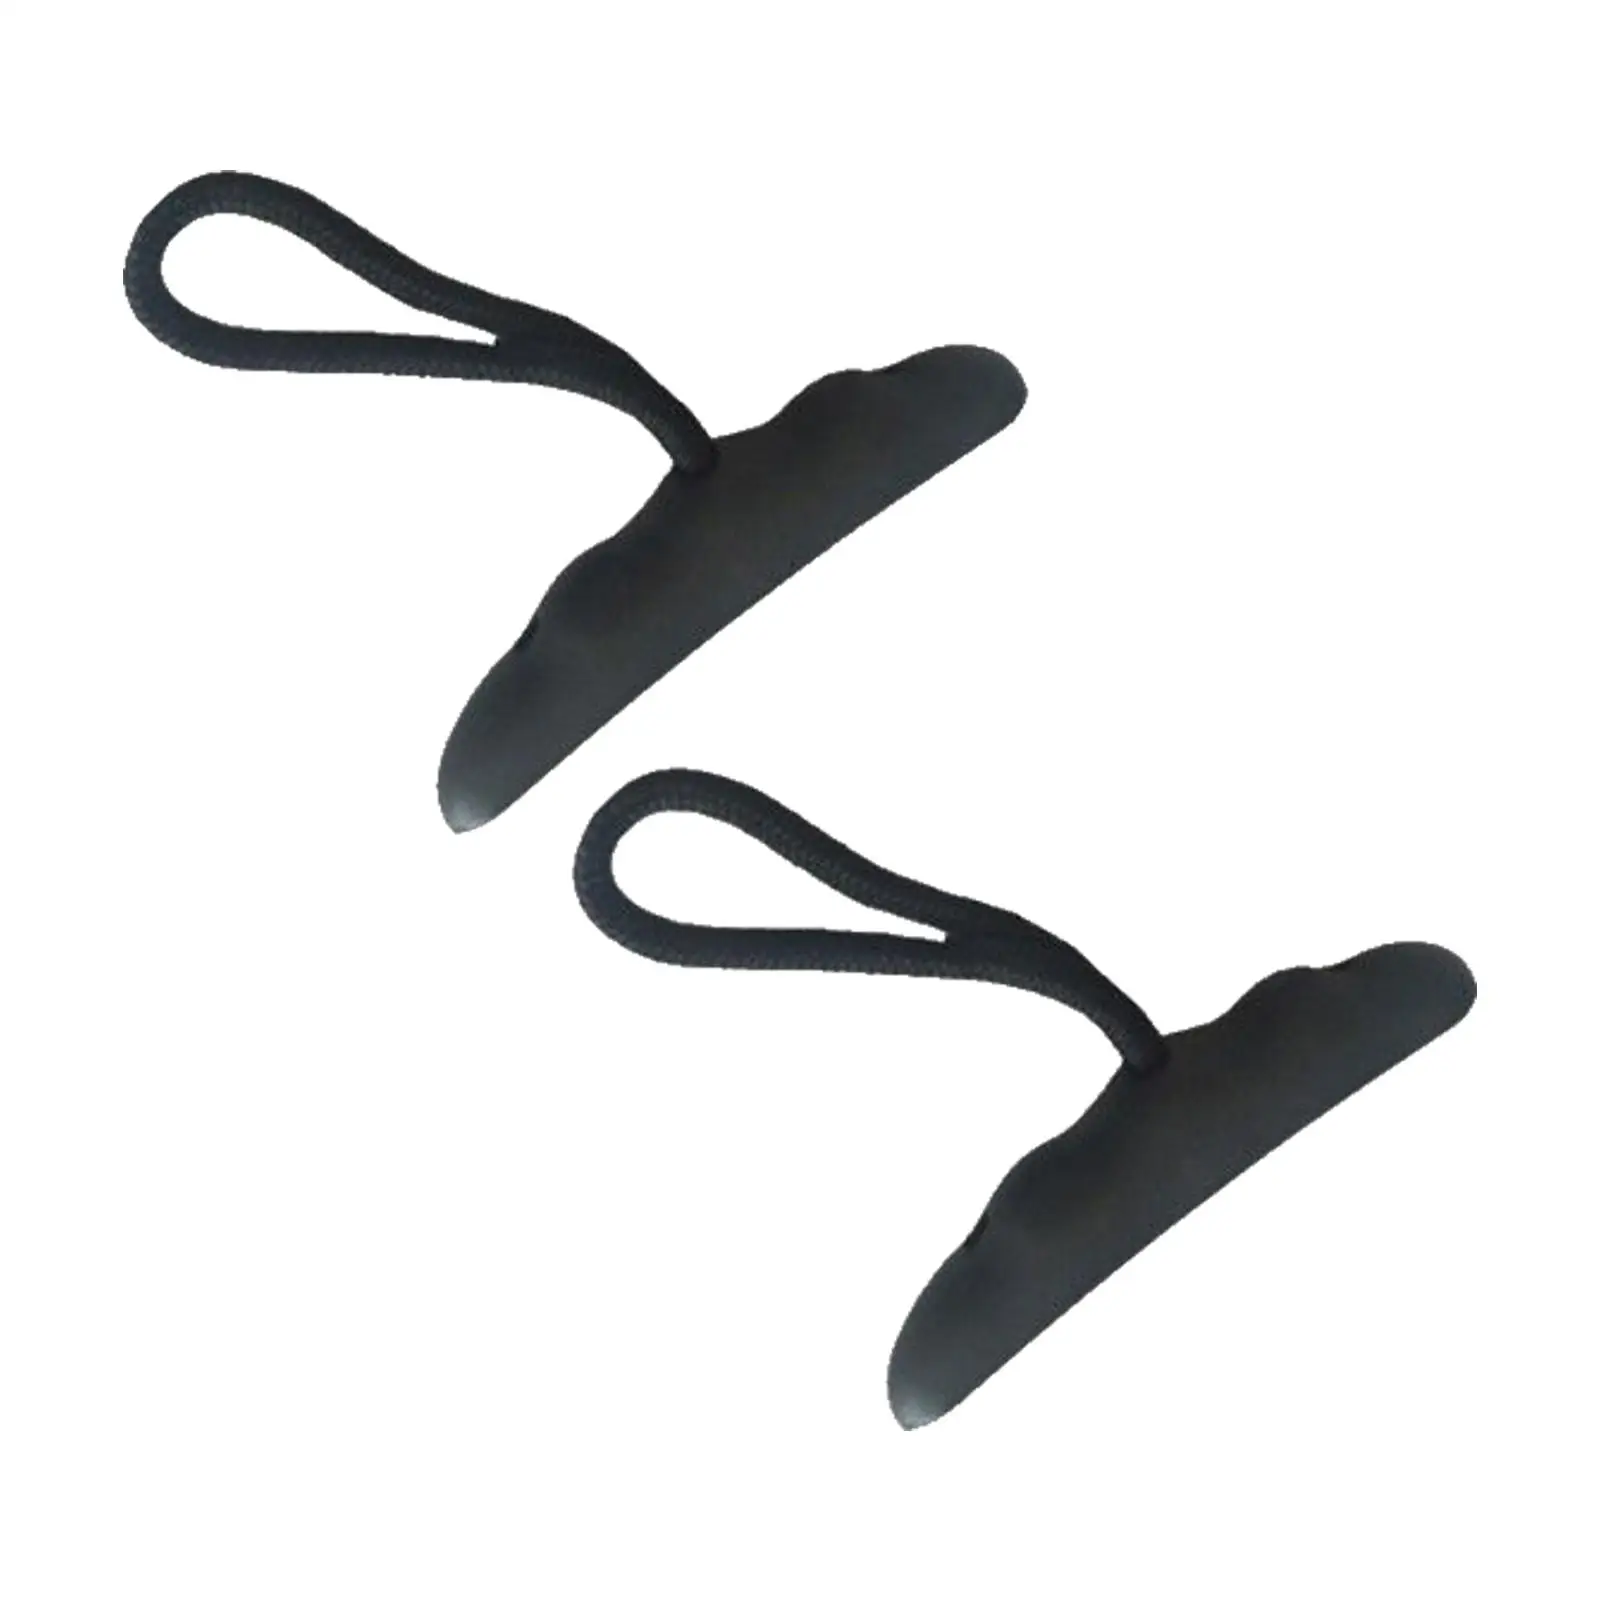 2x Marine Kayak Carry Rope Handles Kayaking Accessories Pull Grips Canoe Carrying Handles with Cord for Drifting Rafting Surfing